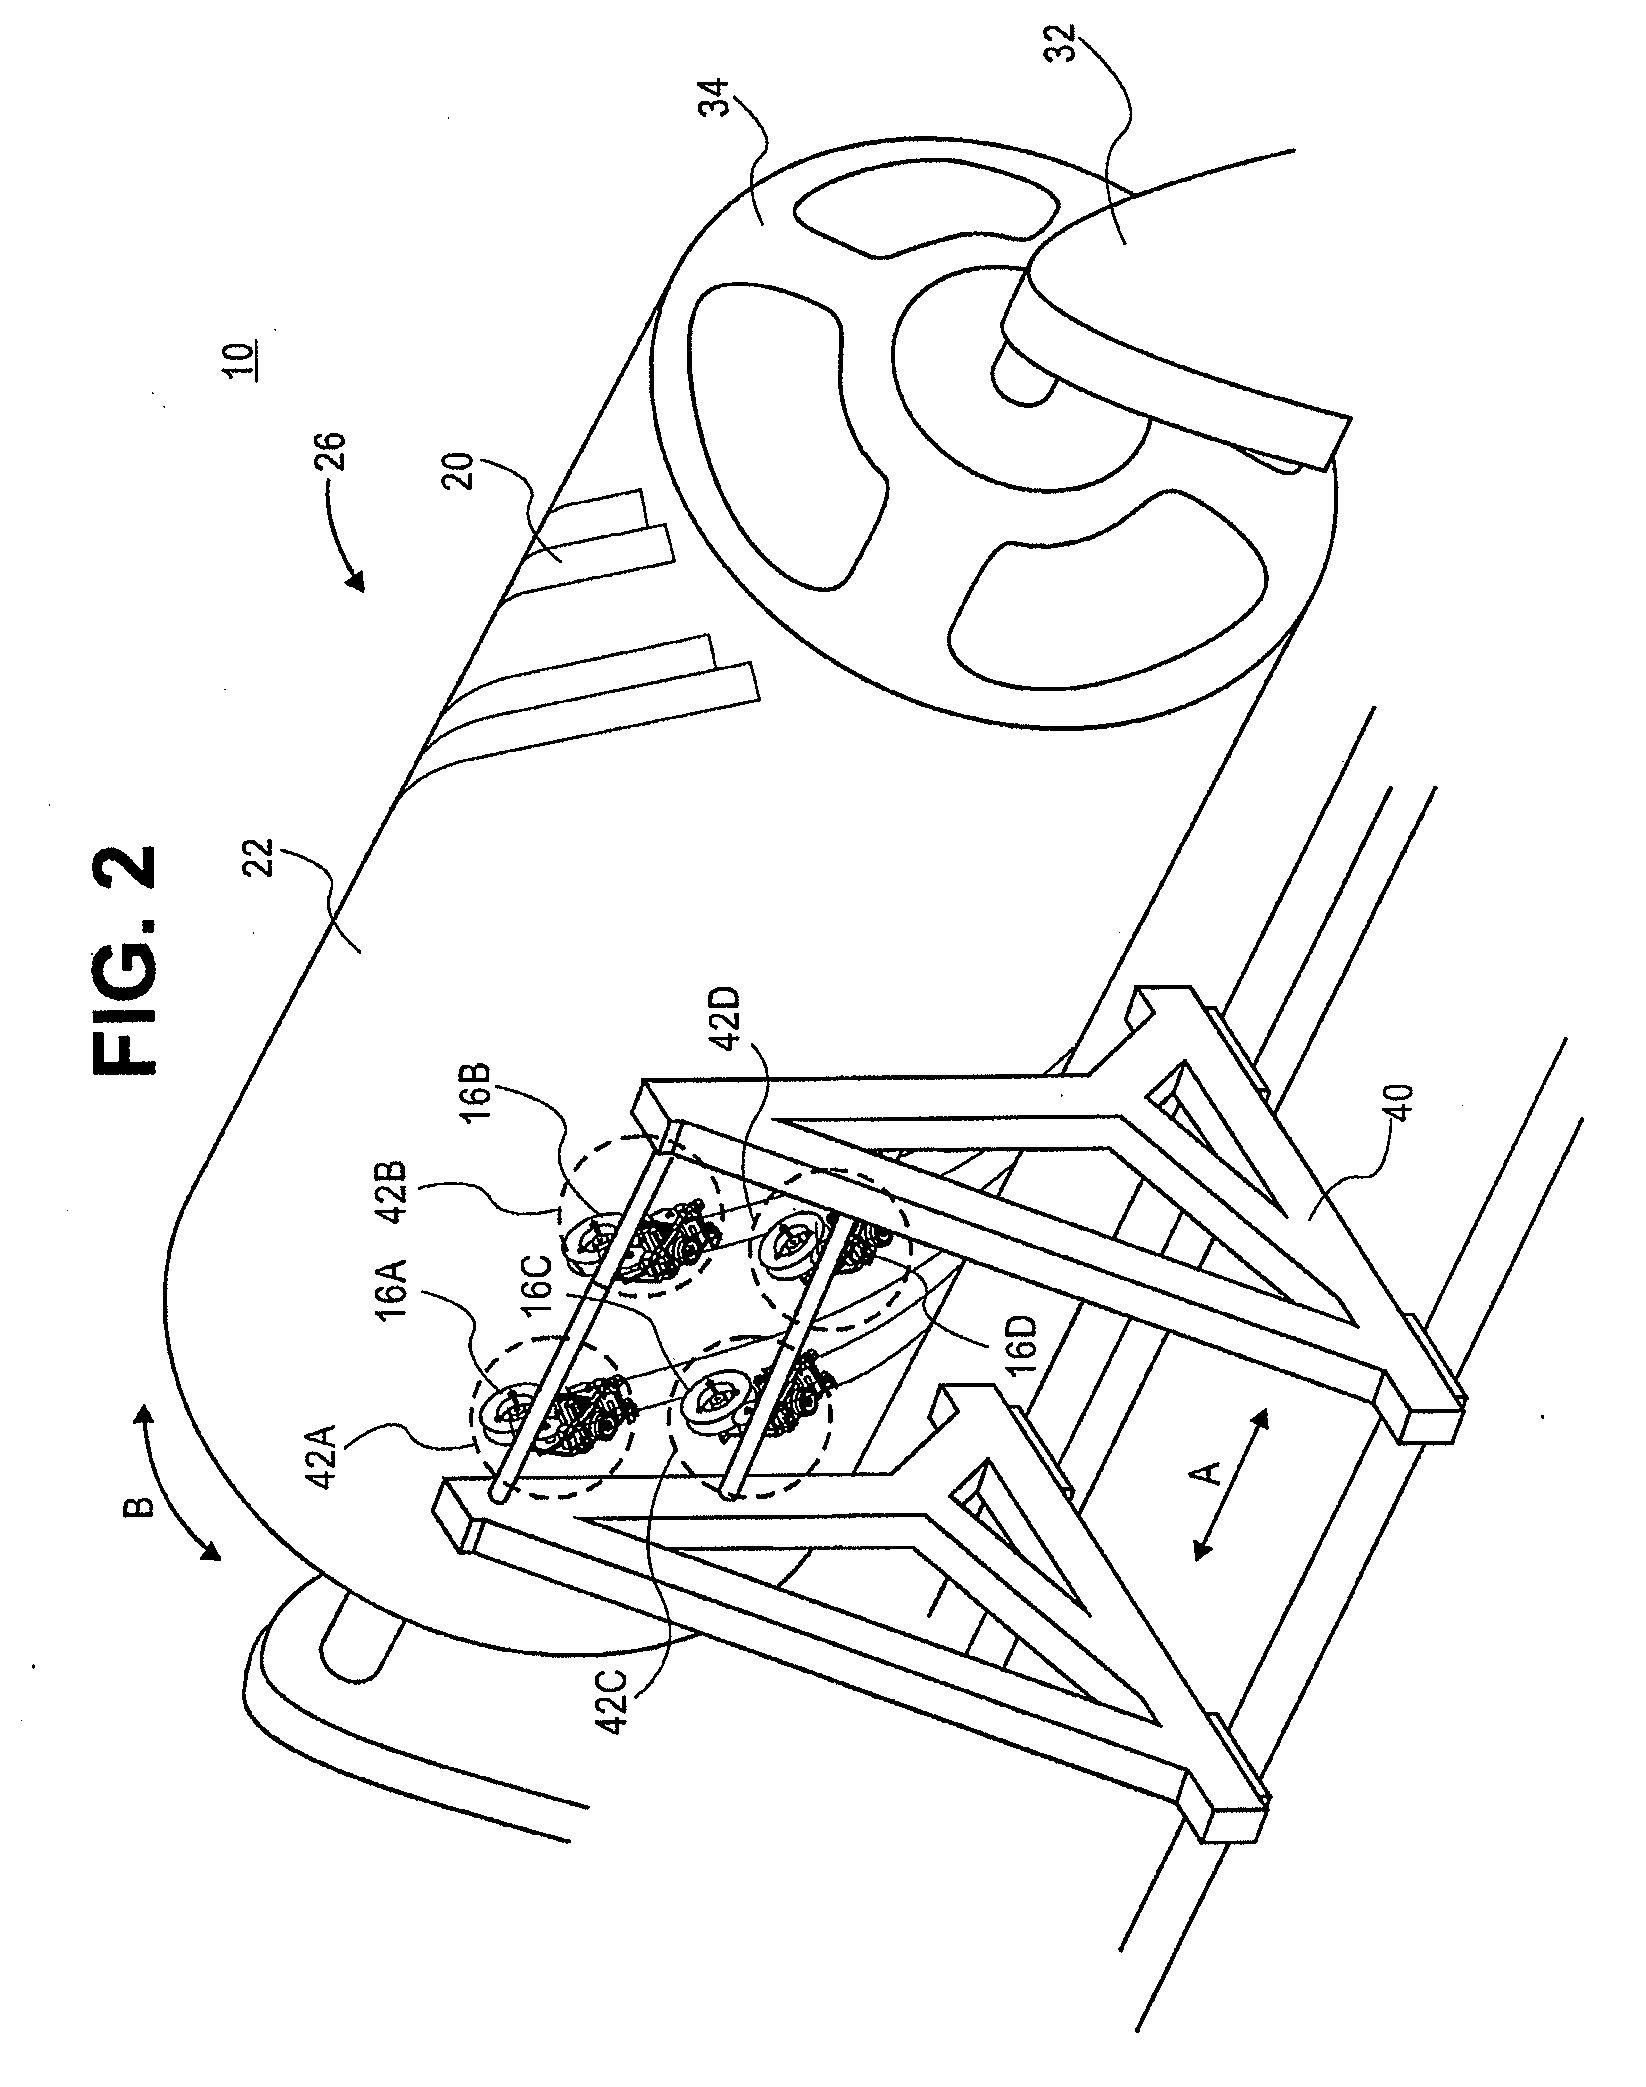 Vision inspection system device and method